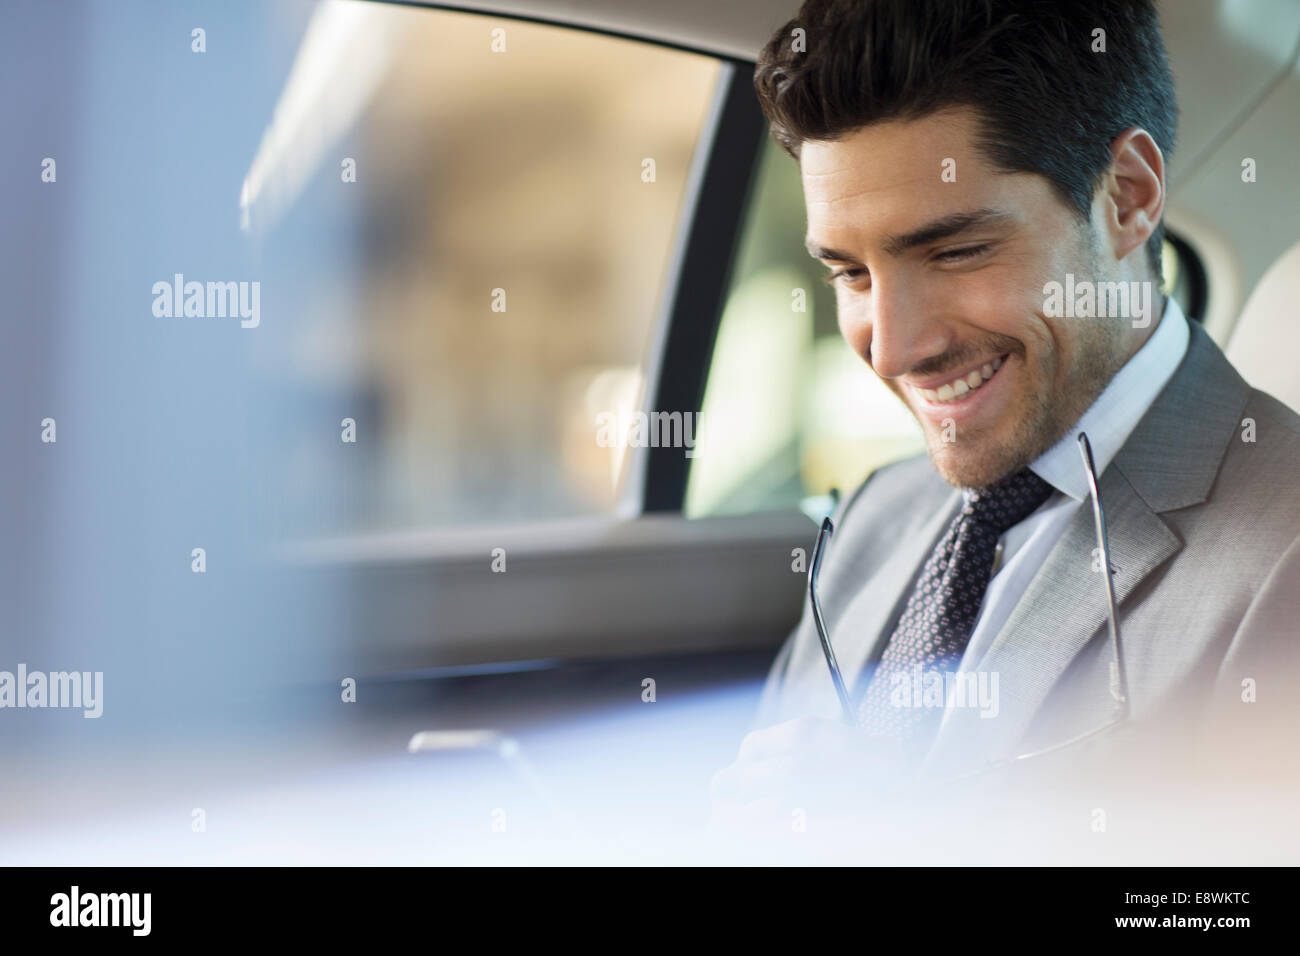 Businessman using cell phone in car back seat Stock Photo